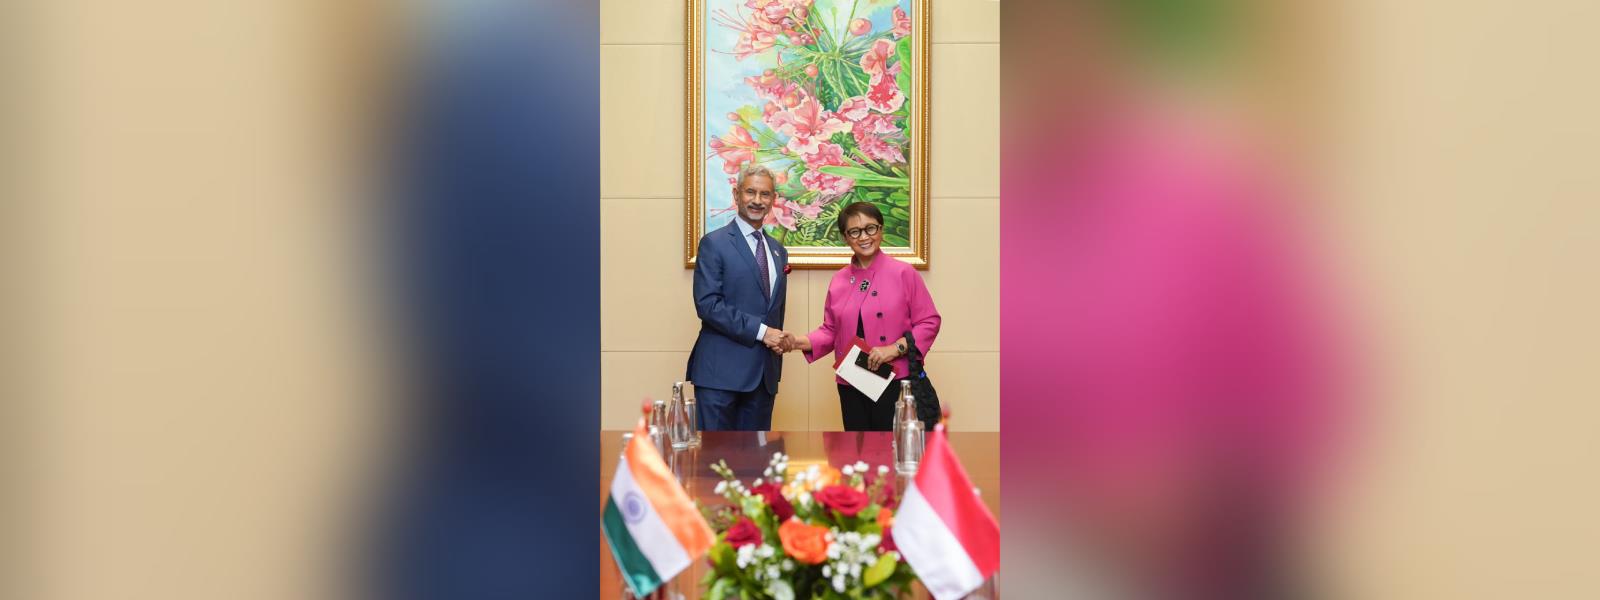 External Affairs Minister Dr. S. Jaishankar met H.E. Ms. Retno Marsudi, Foreign Minister of Indonesia on the sidelines of ASEAN meetings in Vientiane